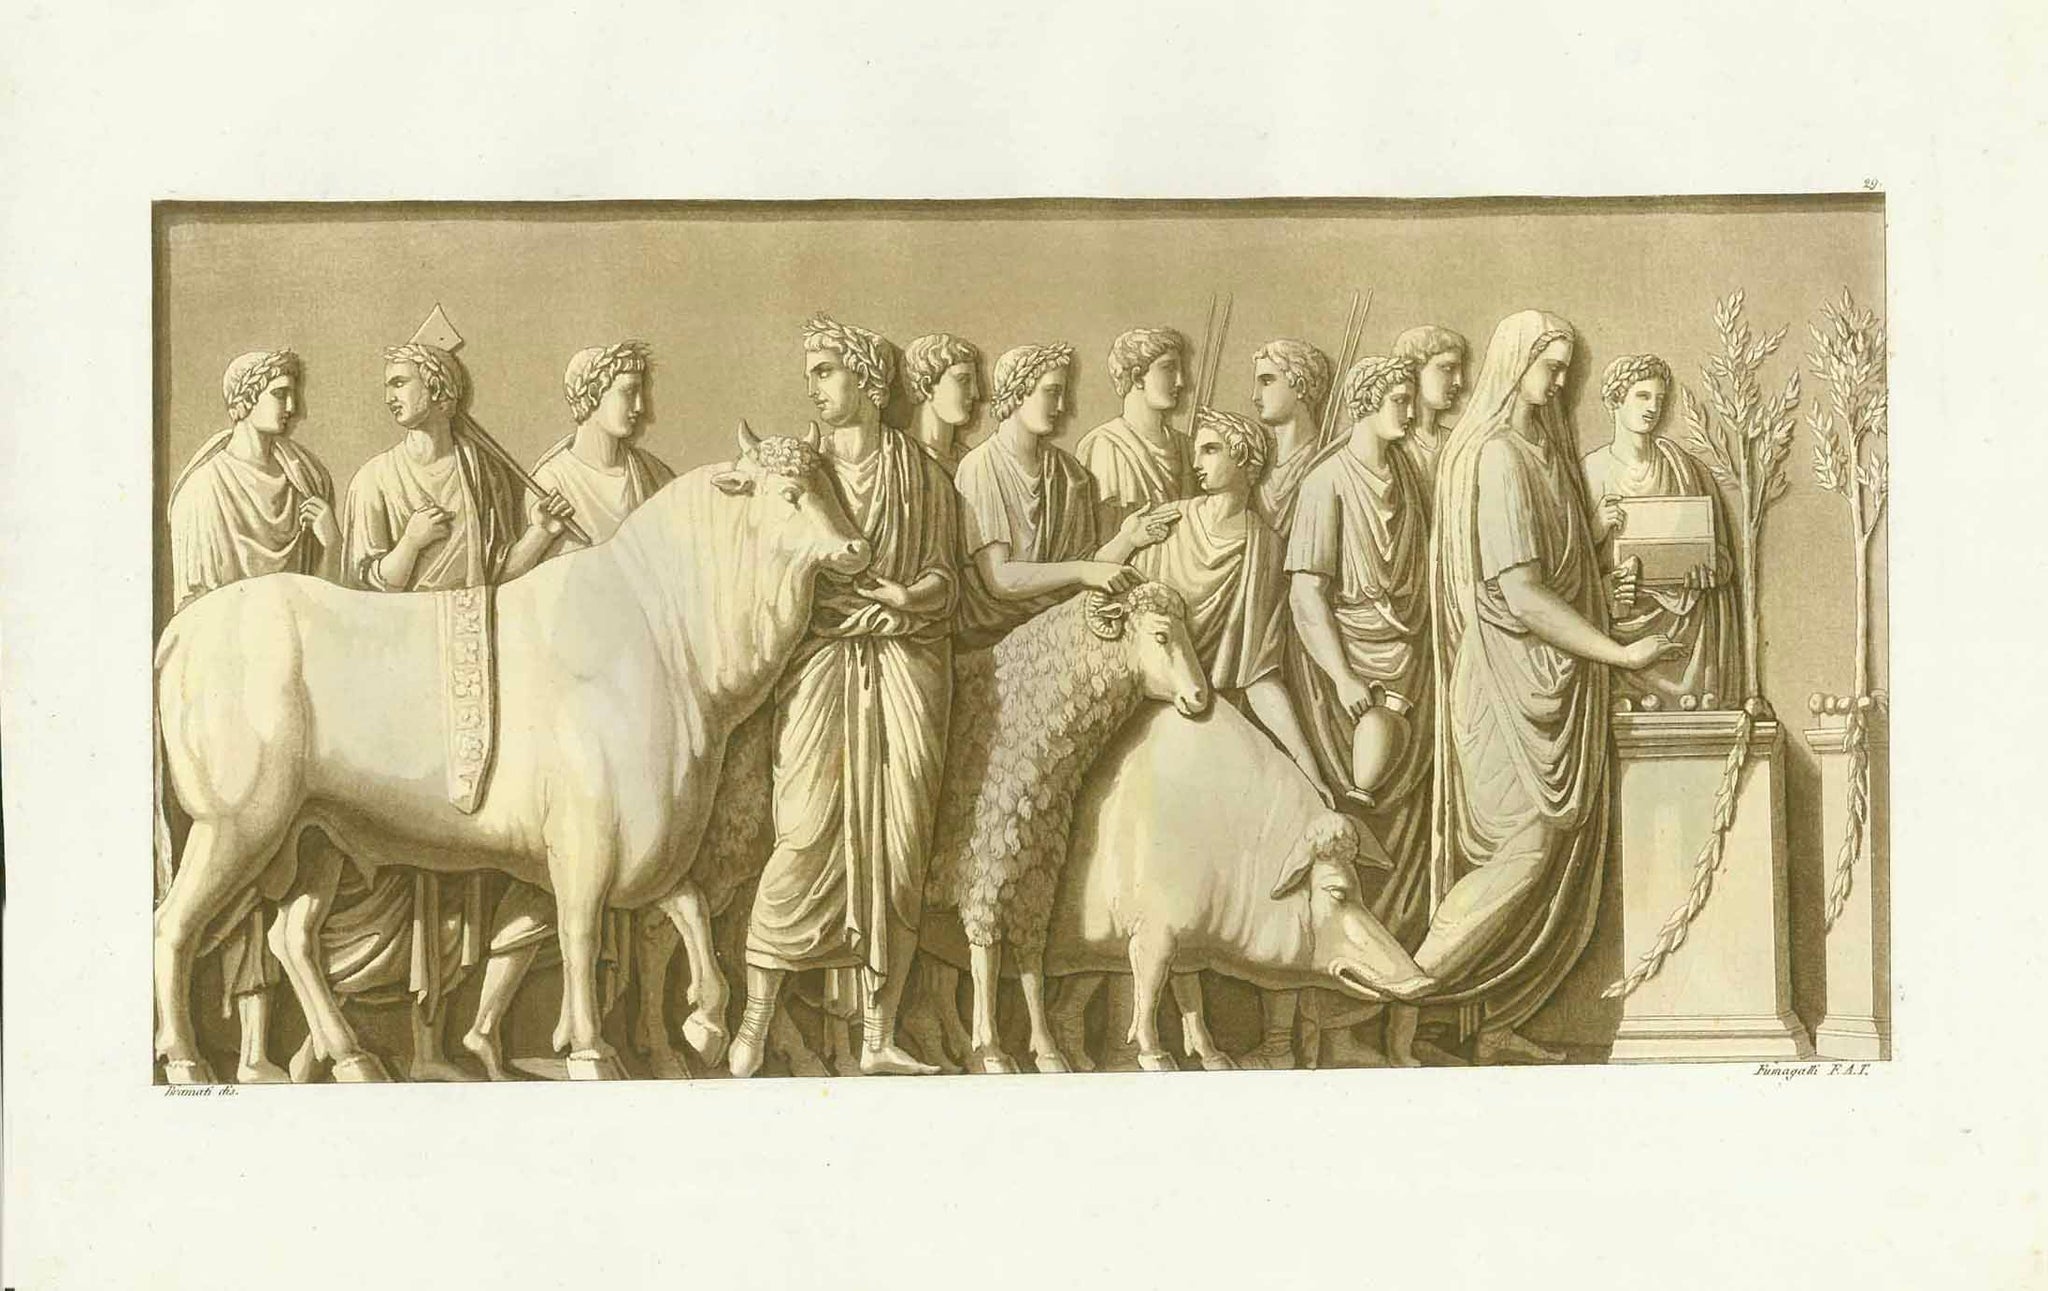 Roman scene preparing for sacrifices of animals.  Toned aquatint by Fumagalli after Bramati, published 1820.  Published in "Le Costume ancien et moderne ou histoire...." Band 12 "Etrusques et Romains...." interior design, wall decoration, ideas, idea, gift ideas, present, vintage, charming, special, decoration, home interior, living room design